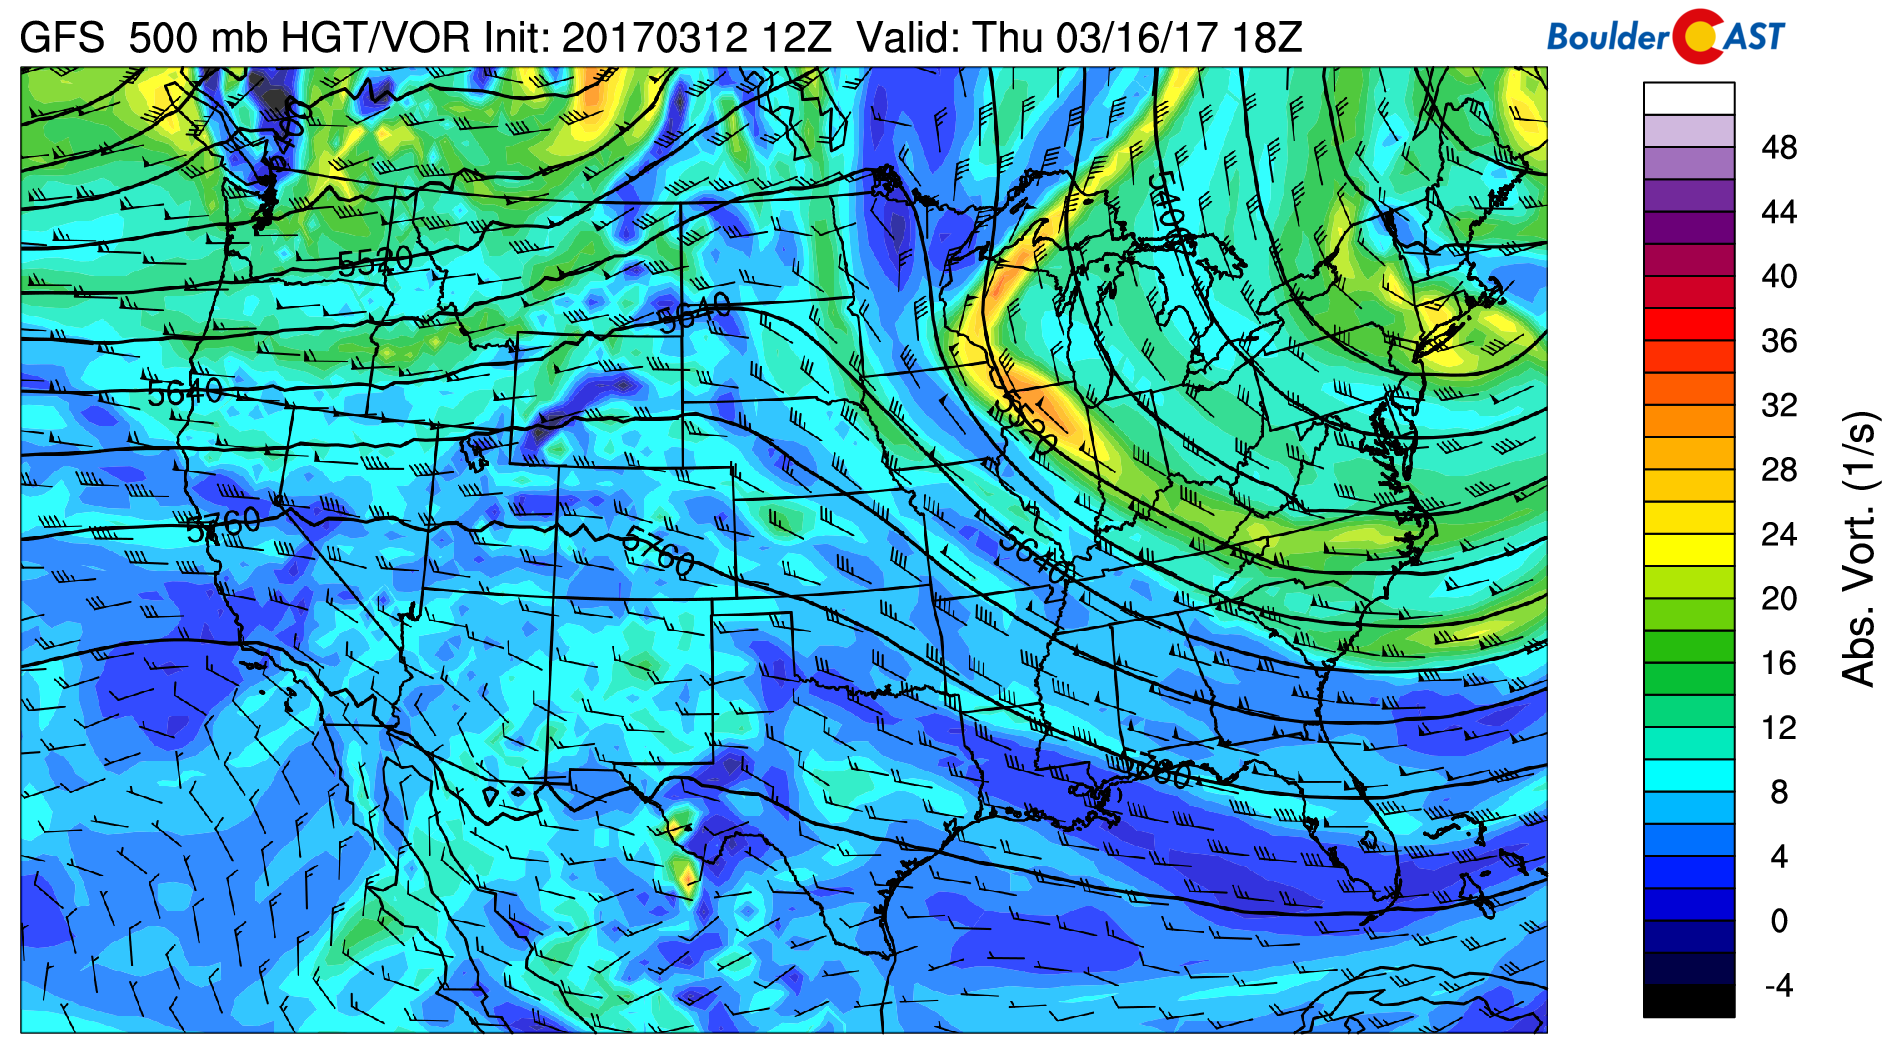 GFS 500 mb absolute vorticity map for Thursday